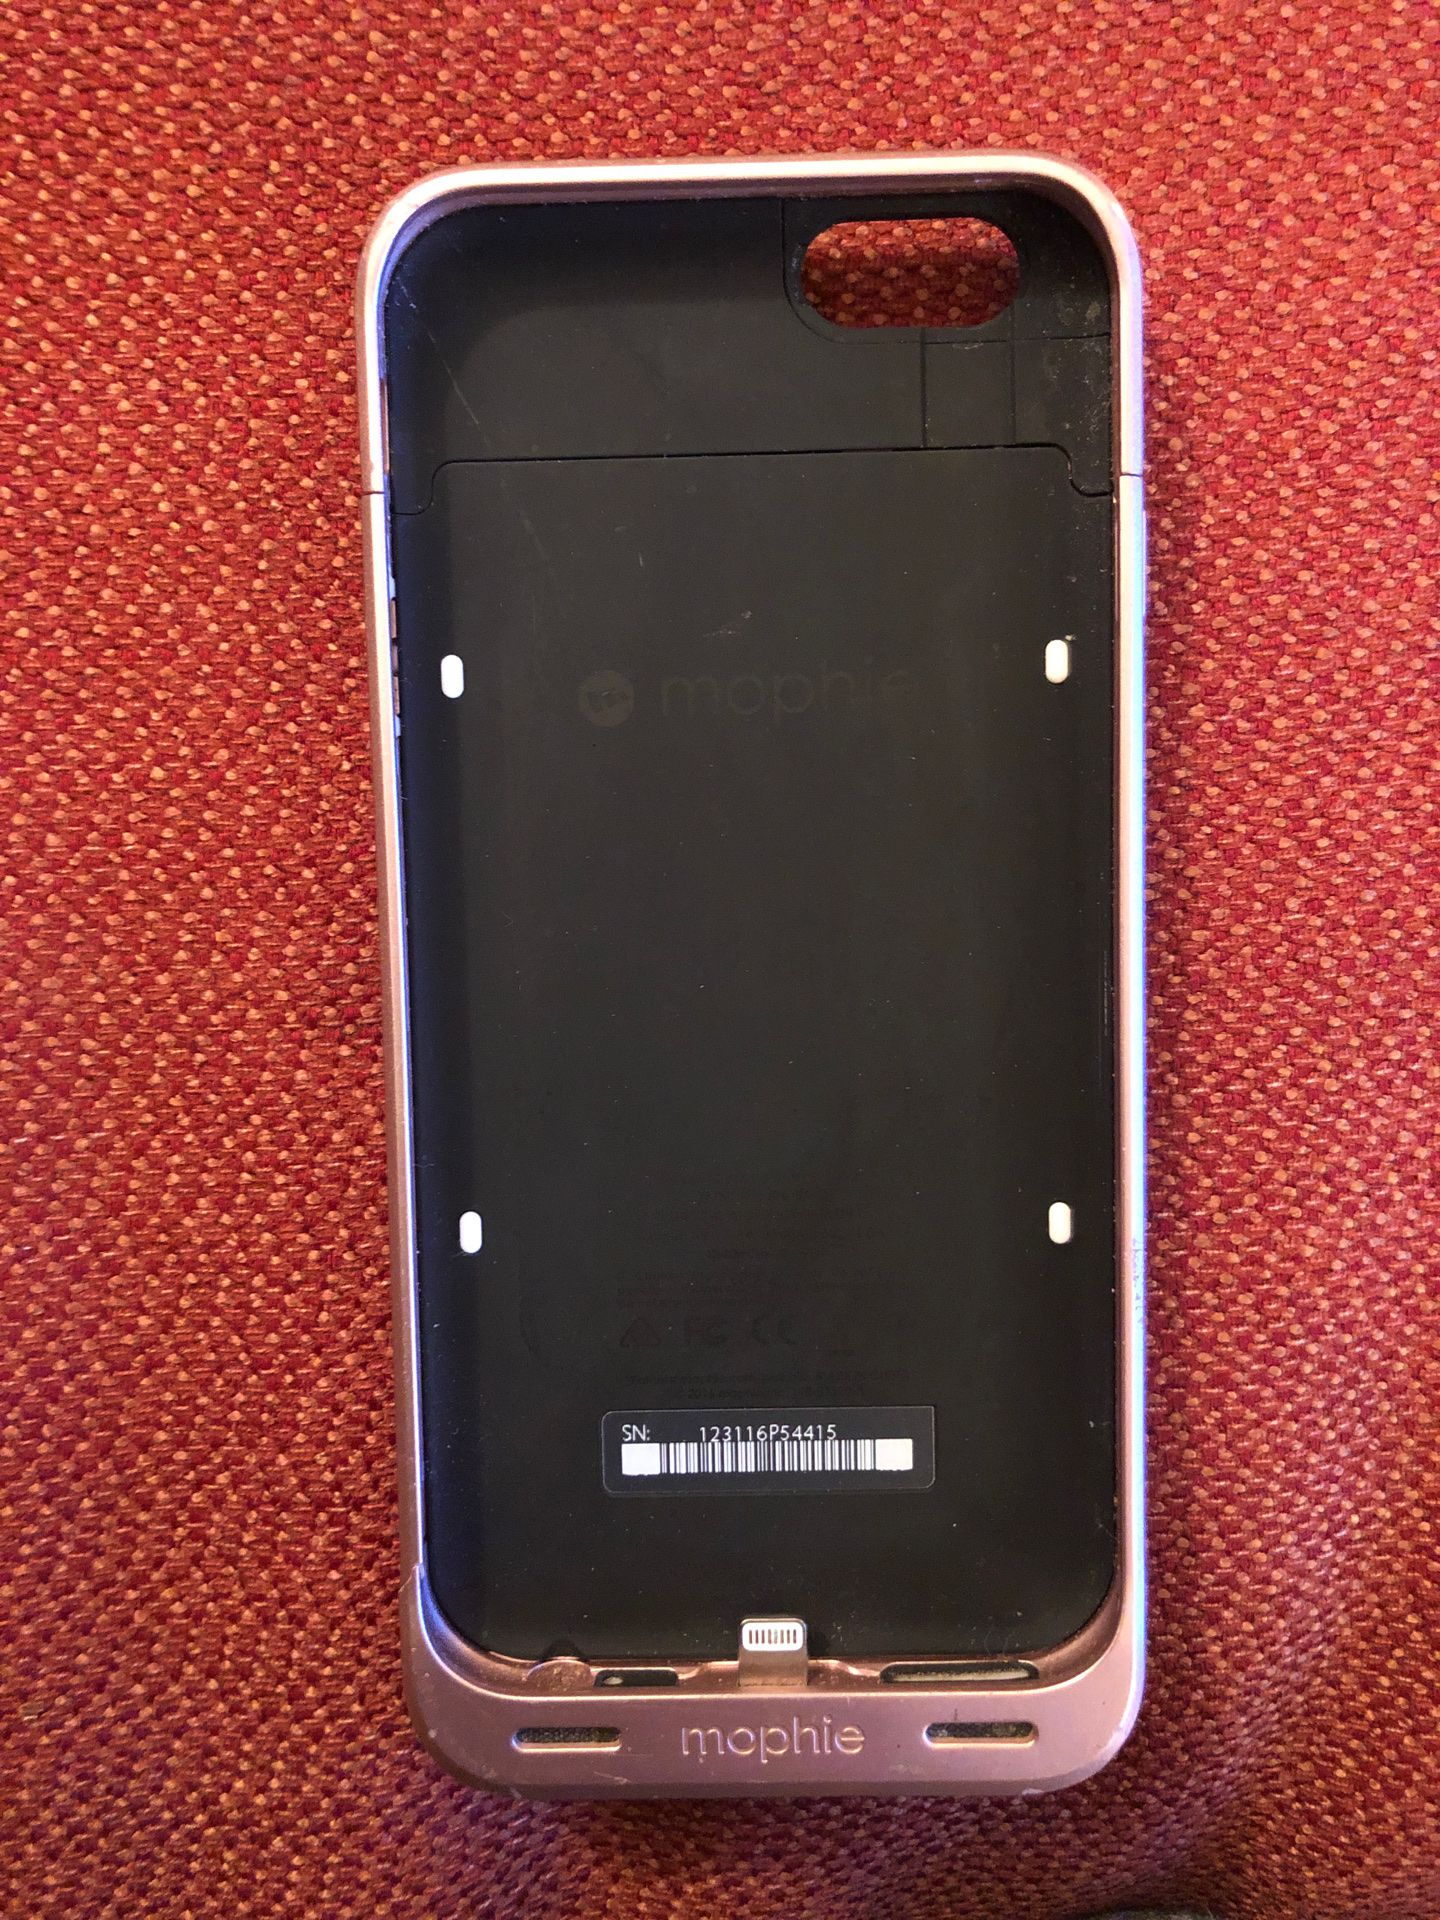 iPhone 6 mophie charging case